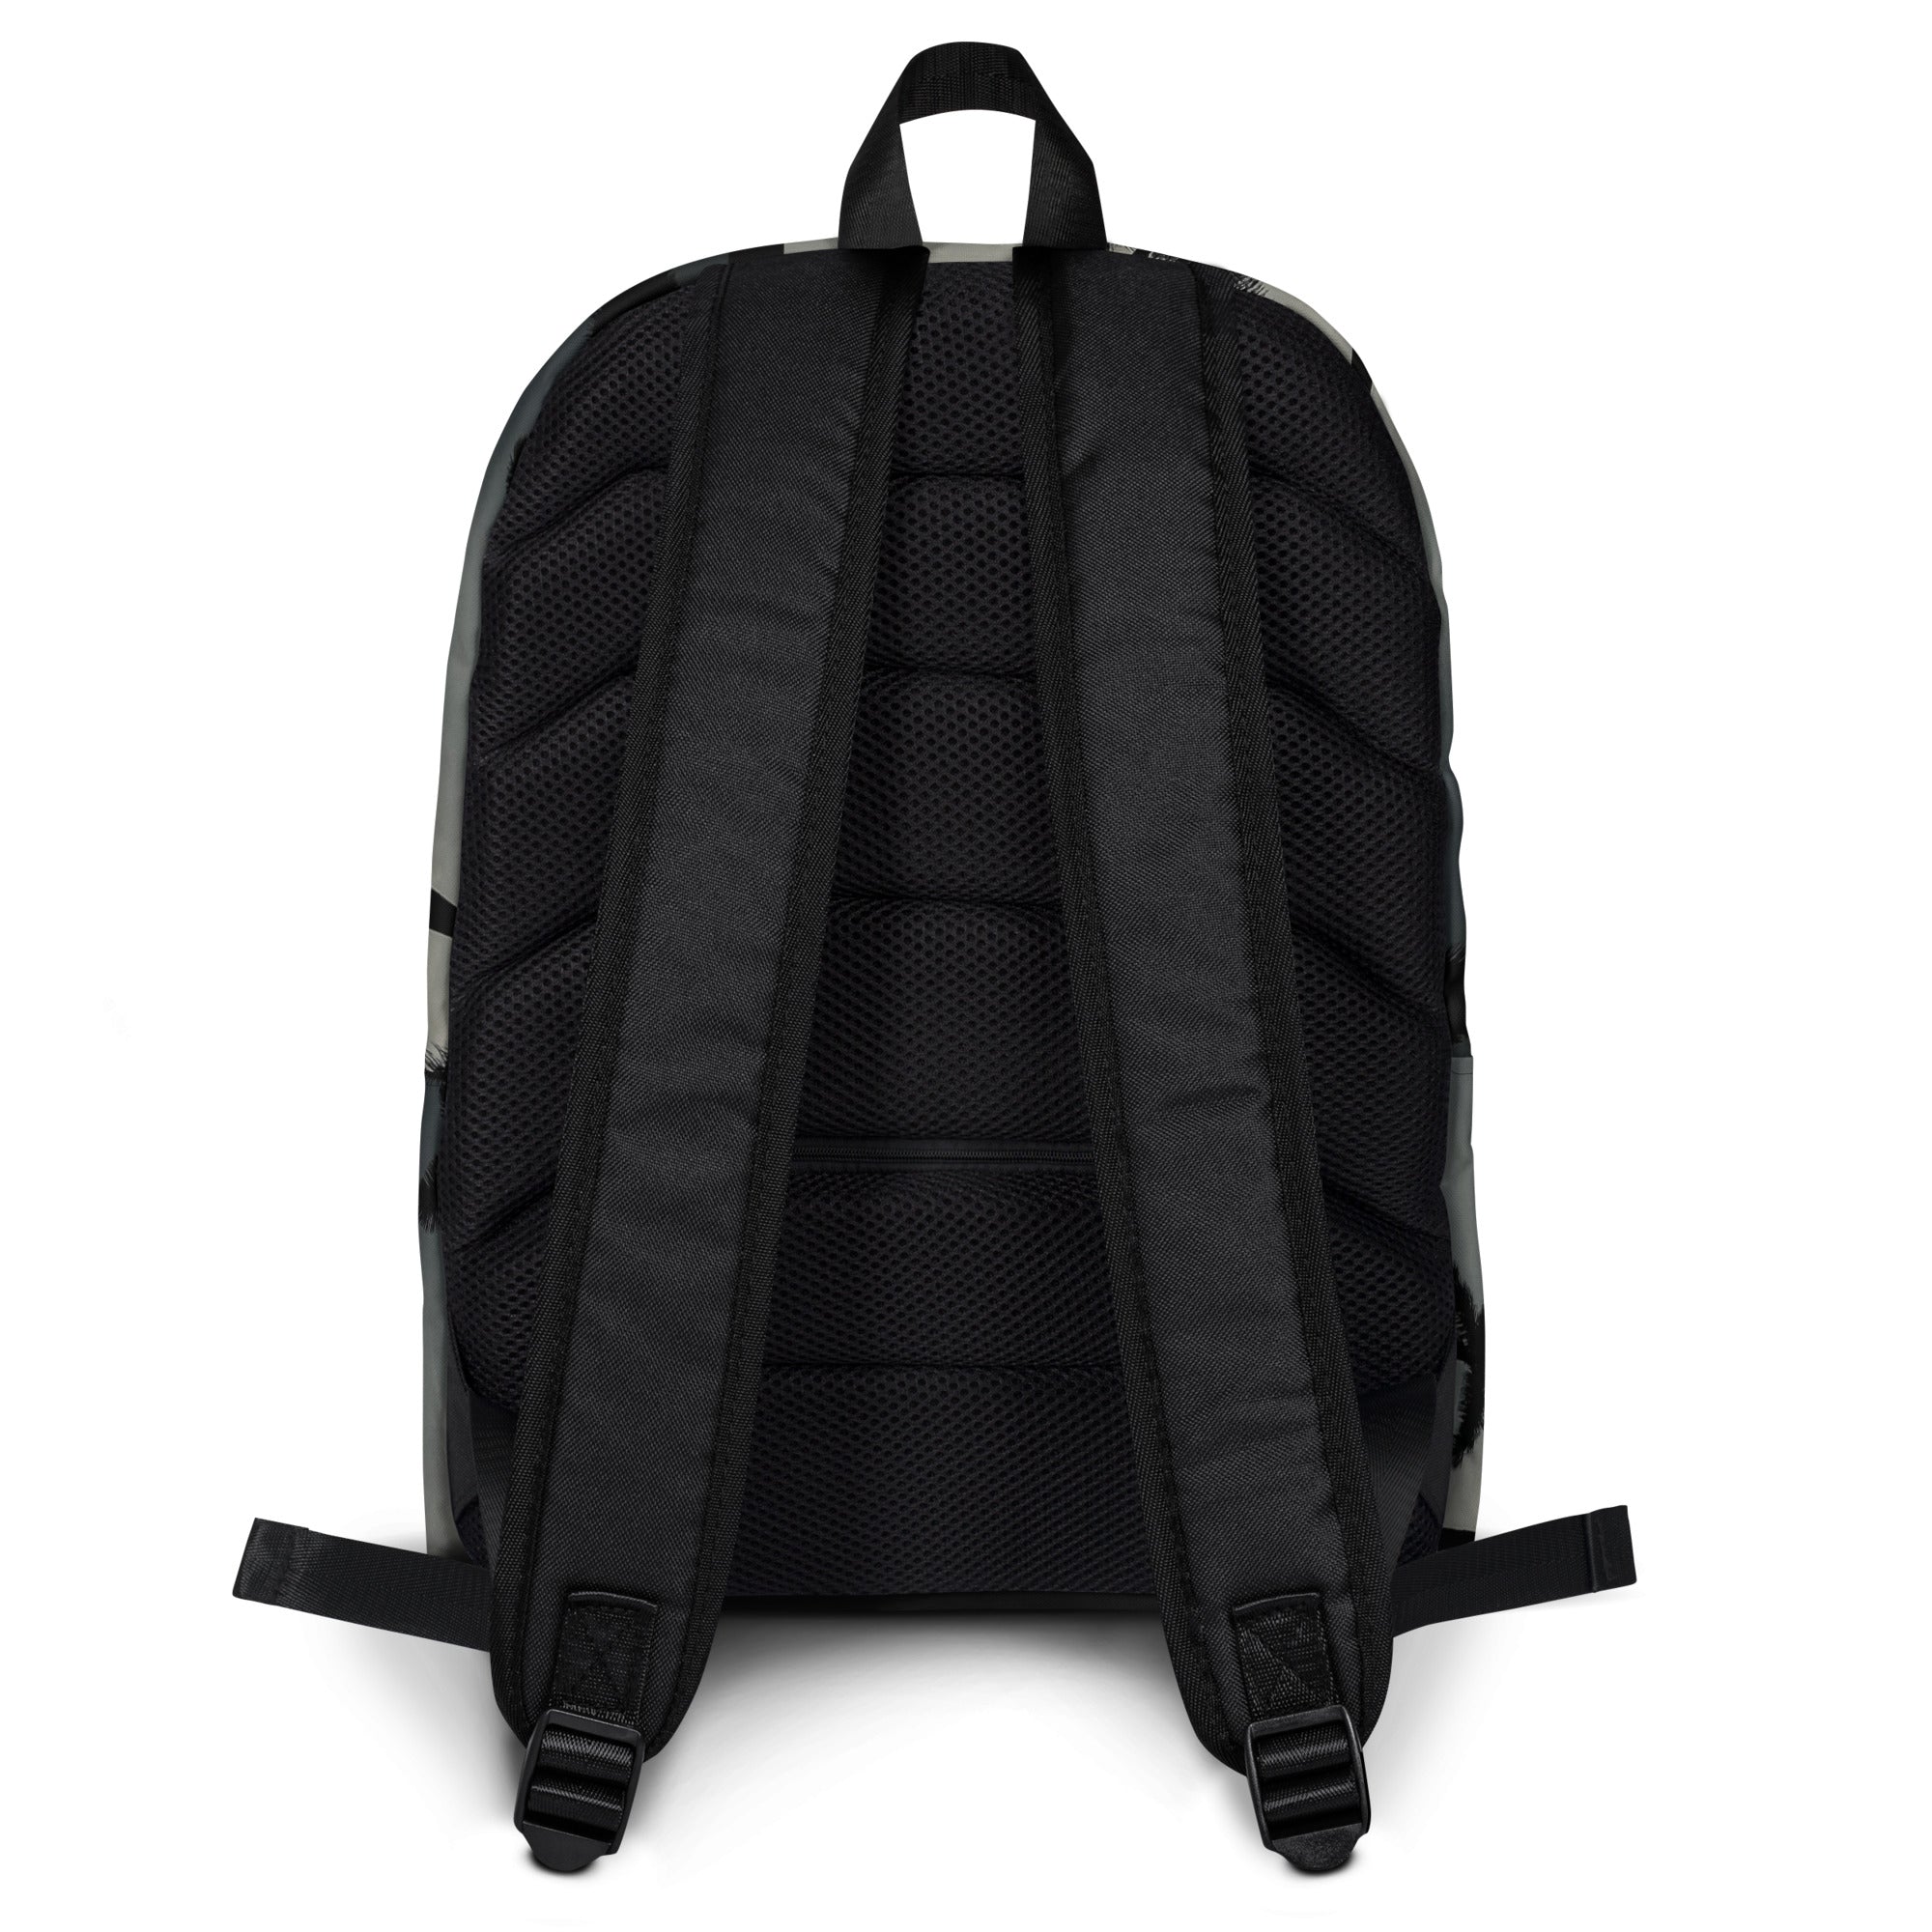 Trouble in Paradise, Envy Backpack